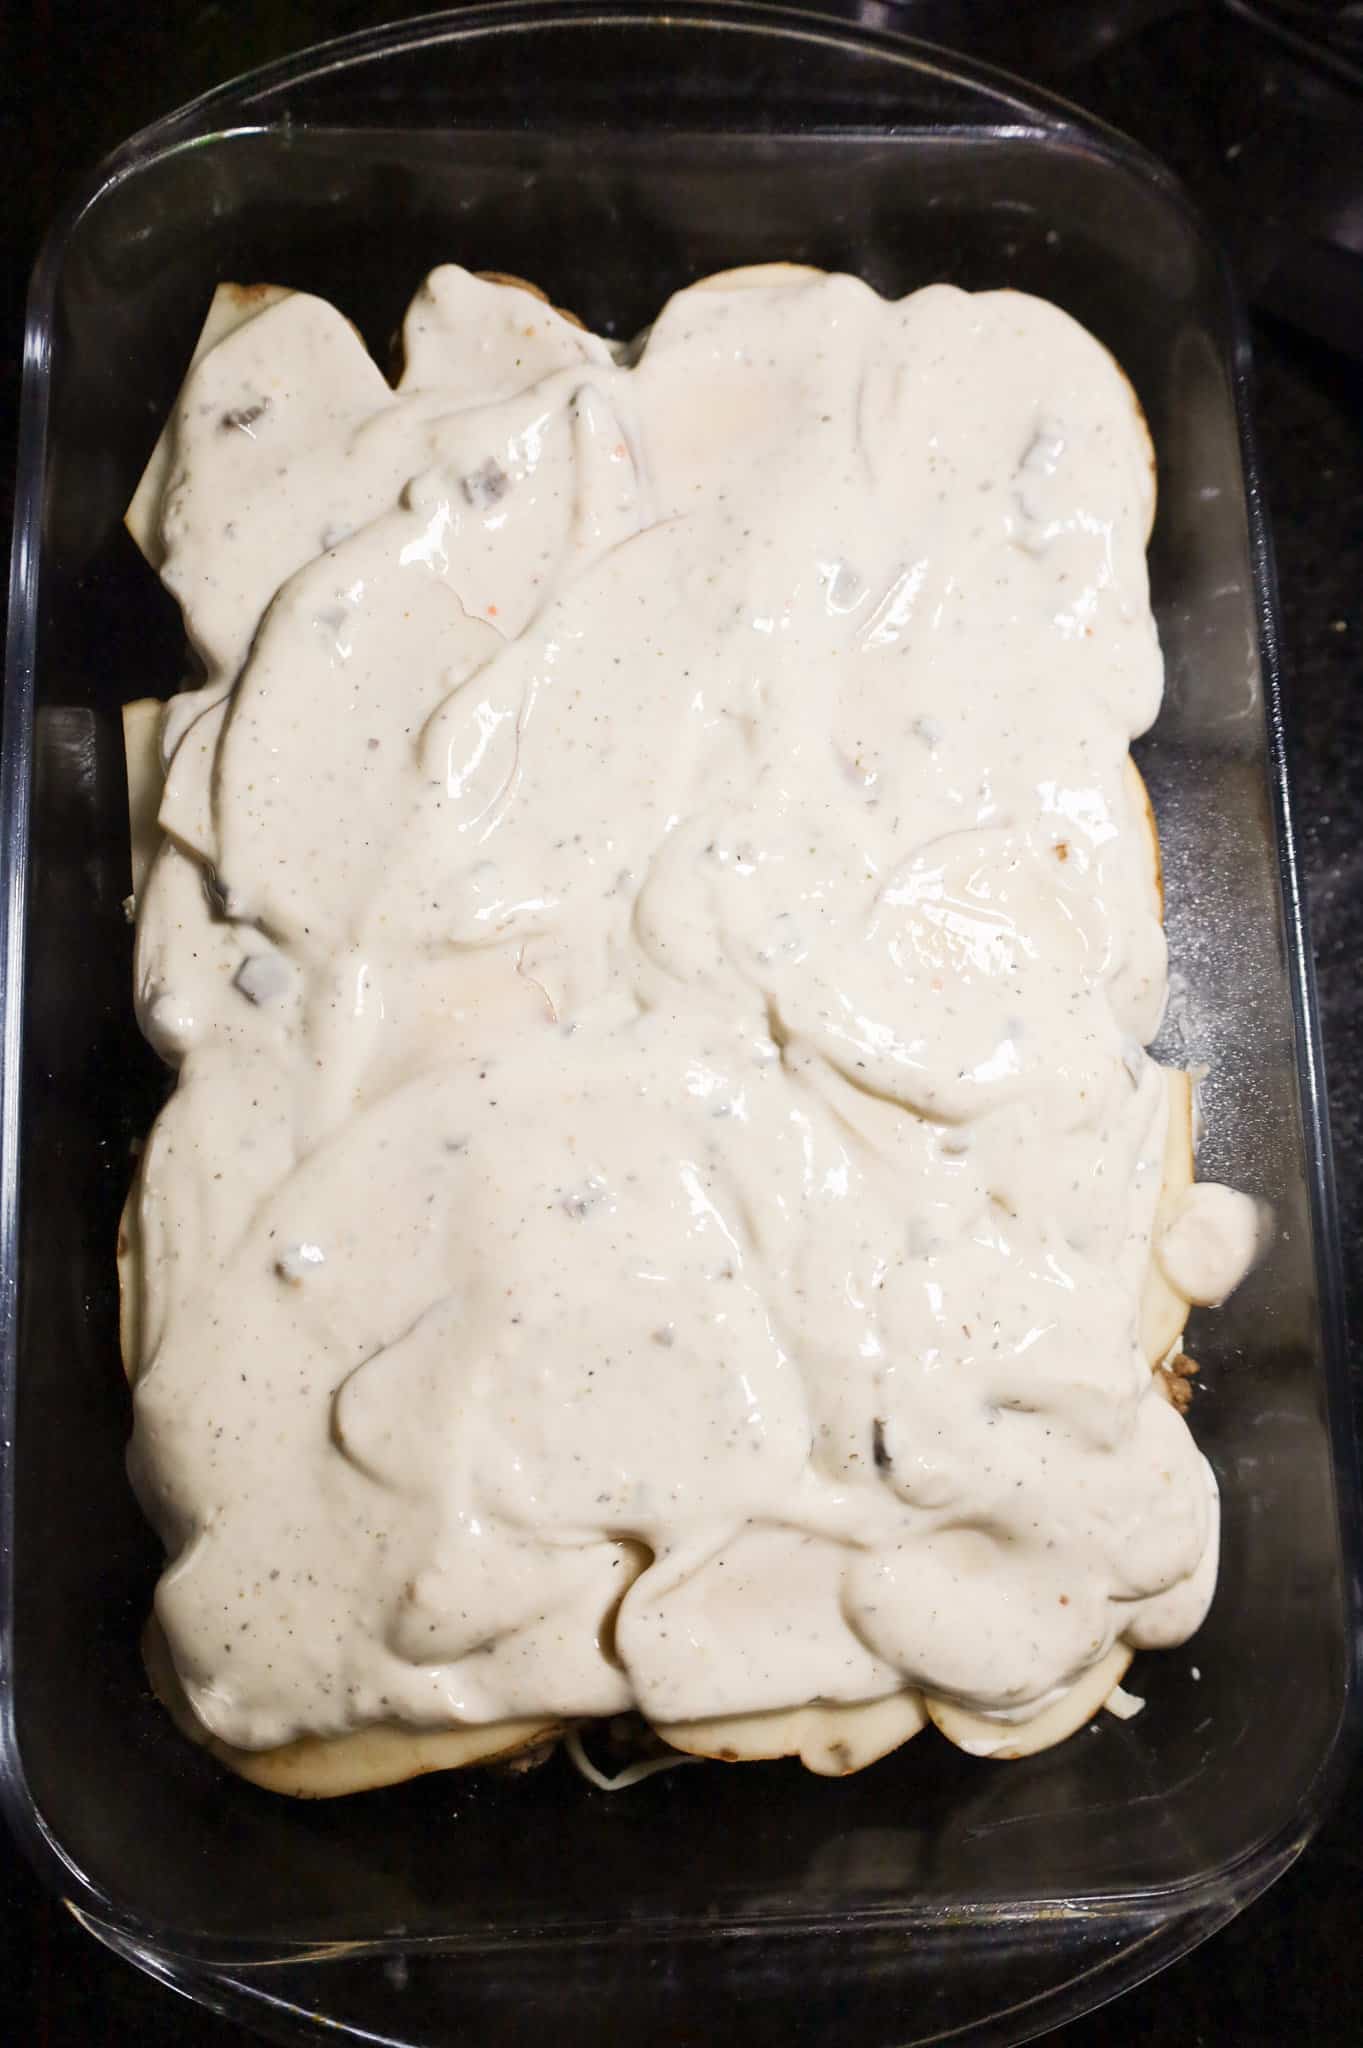 cream of mushroom soup mixture spread on potato slices in a baking dish